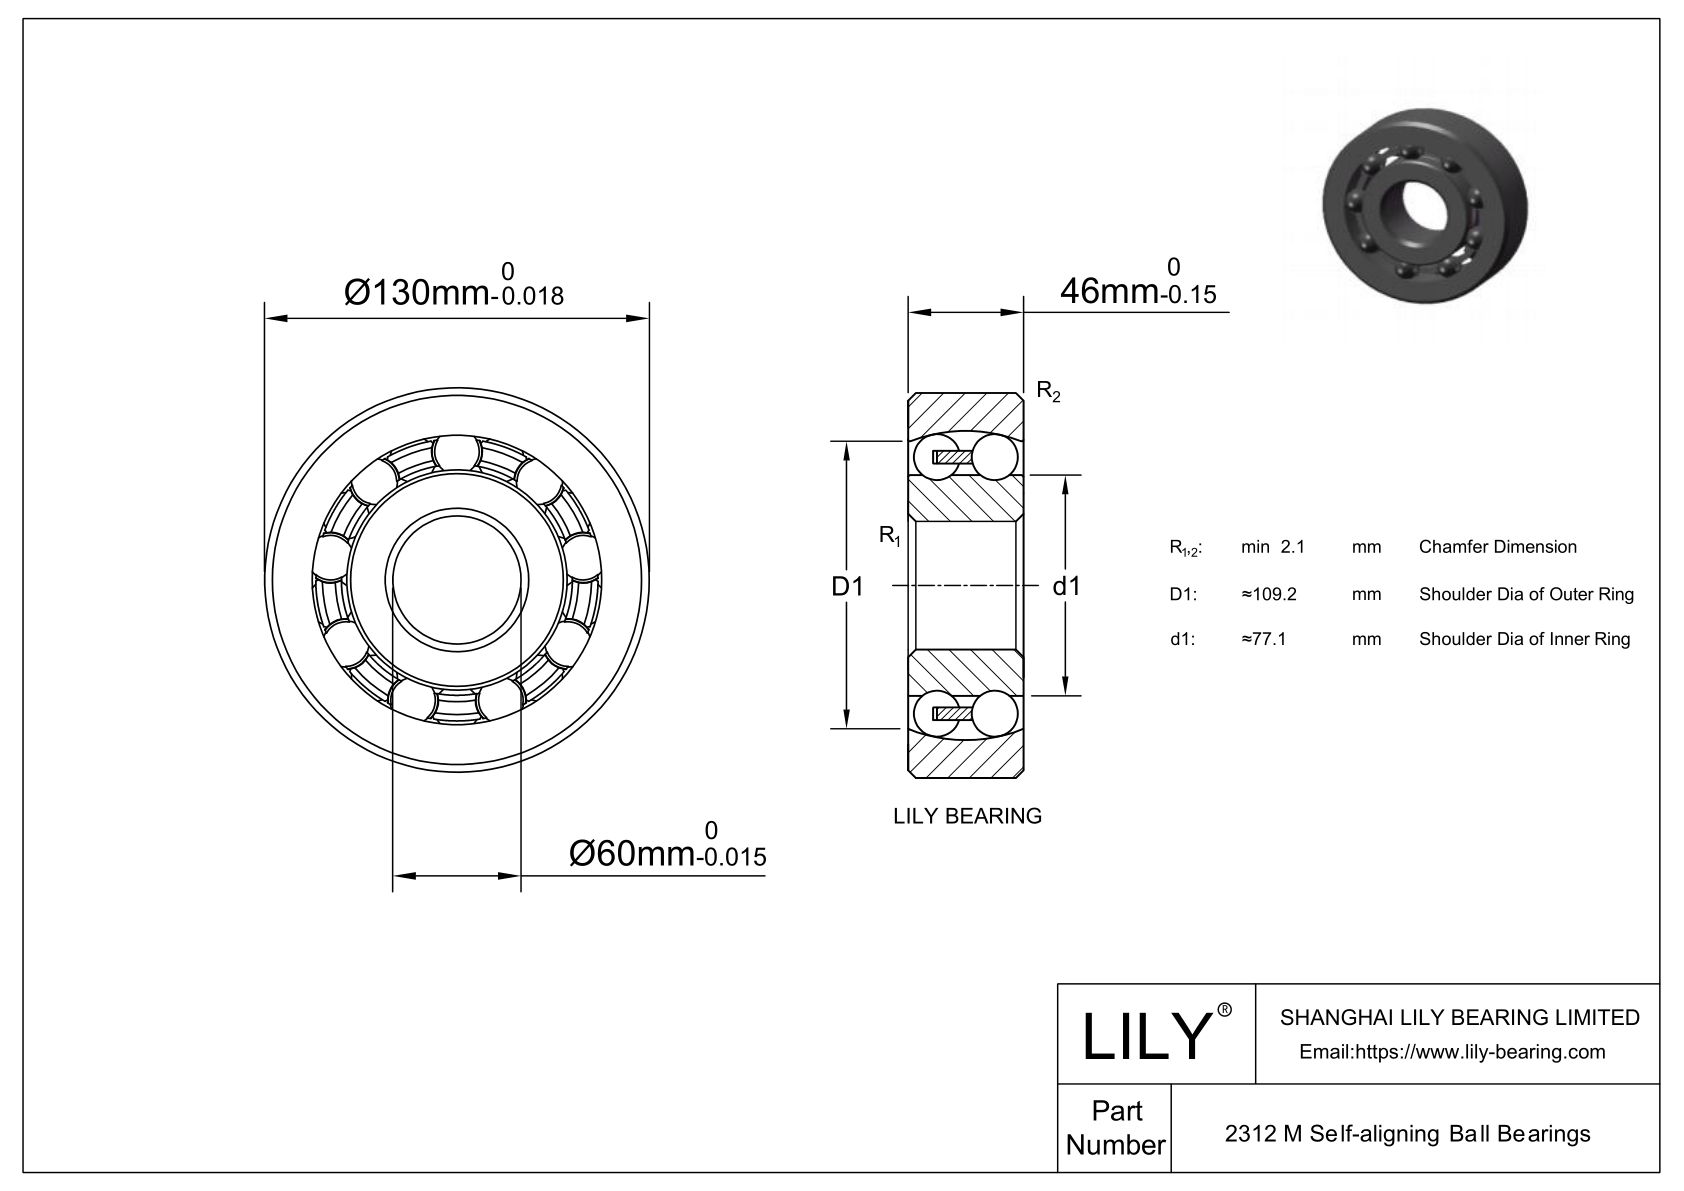 S2312 M Stainless Steel Self Aligning Ball Bearings cad drawing